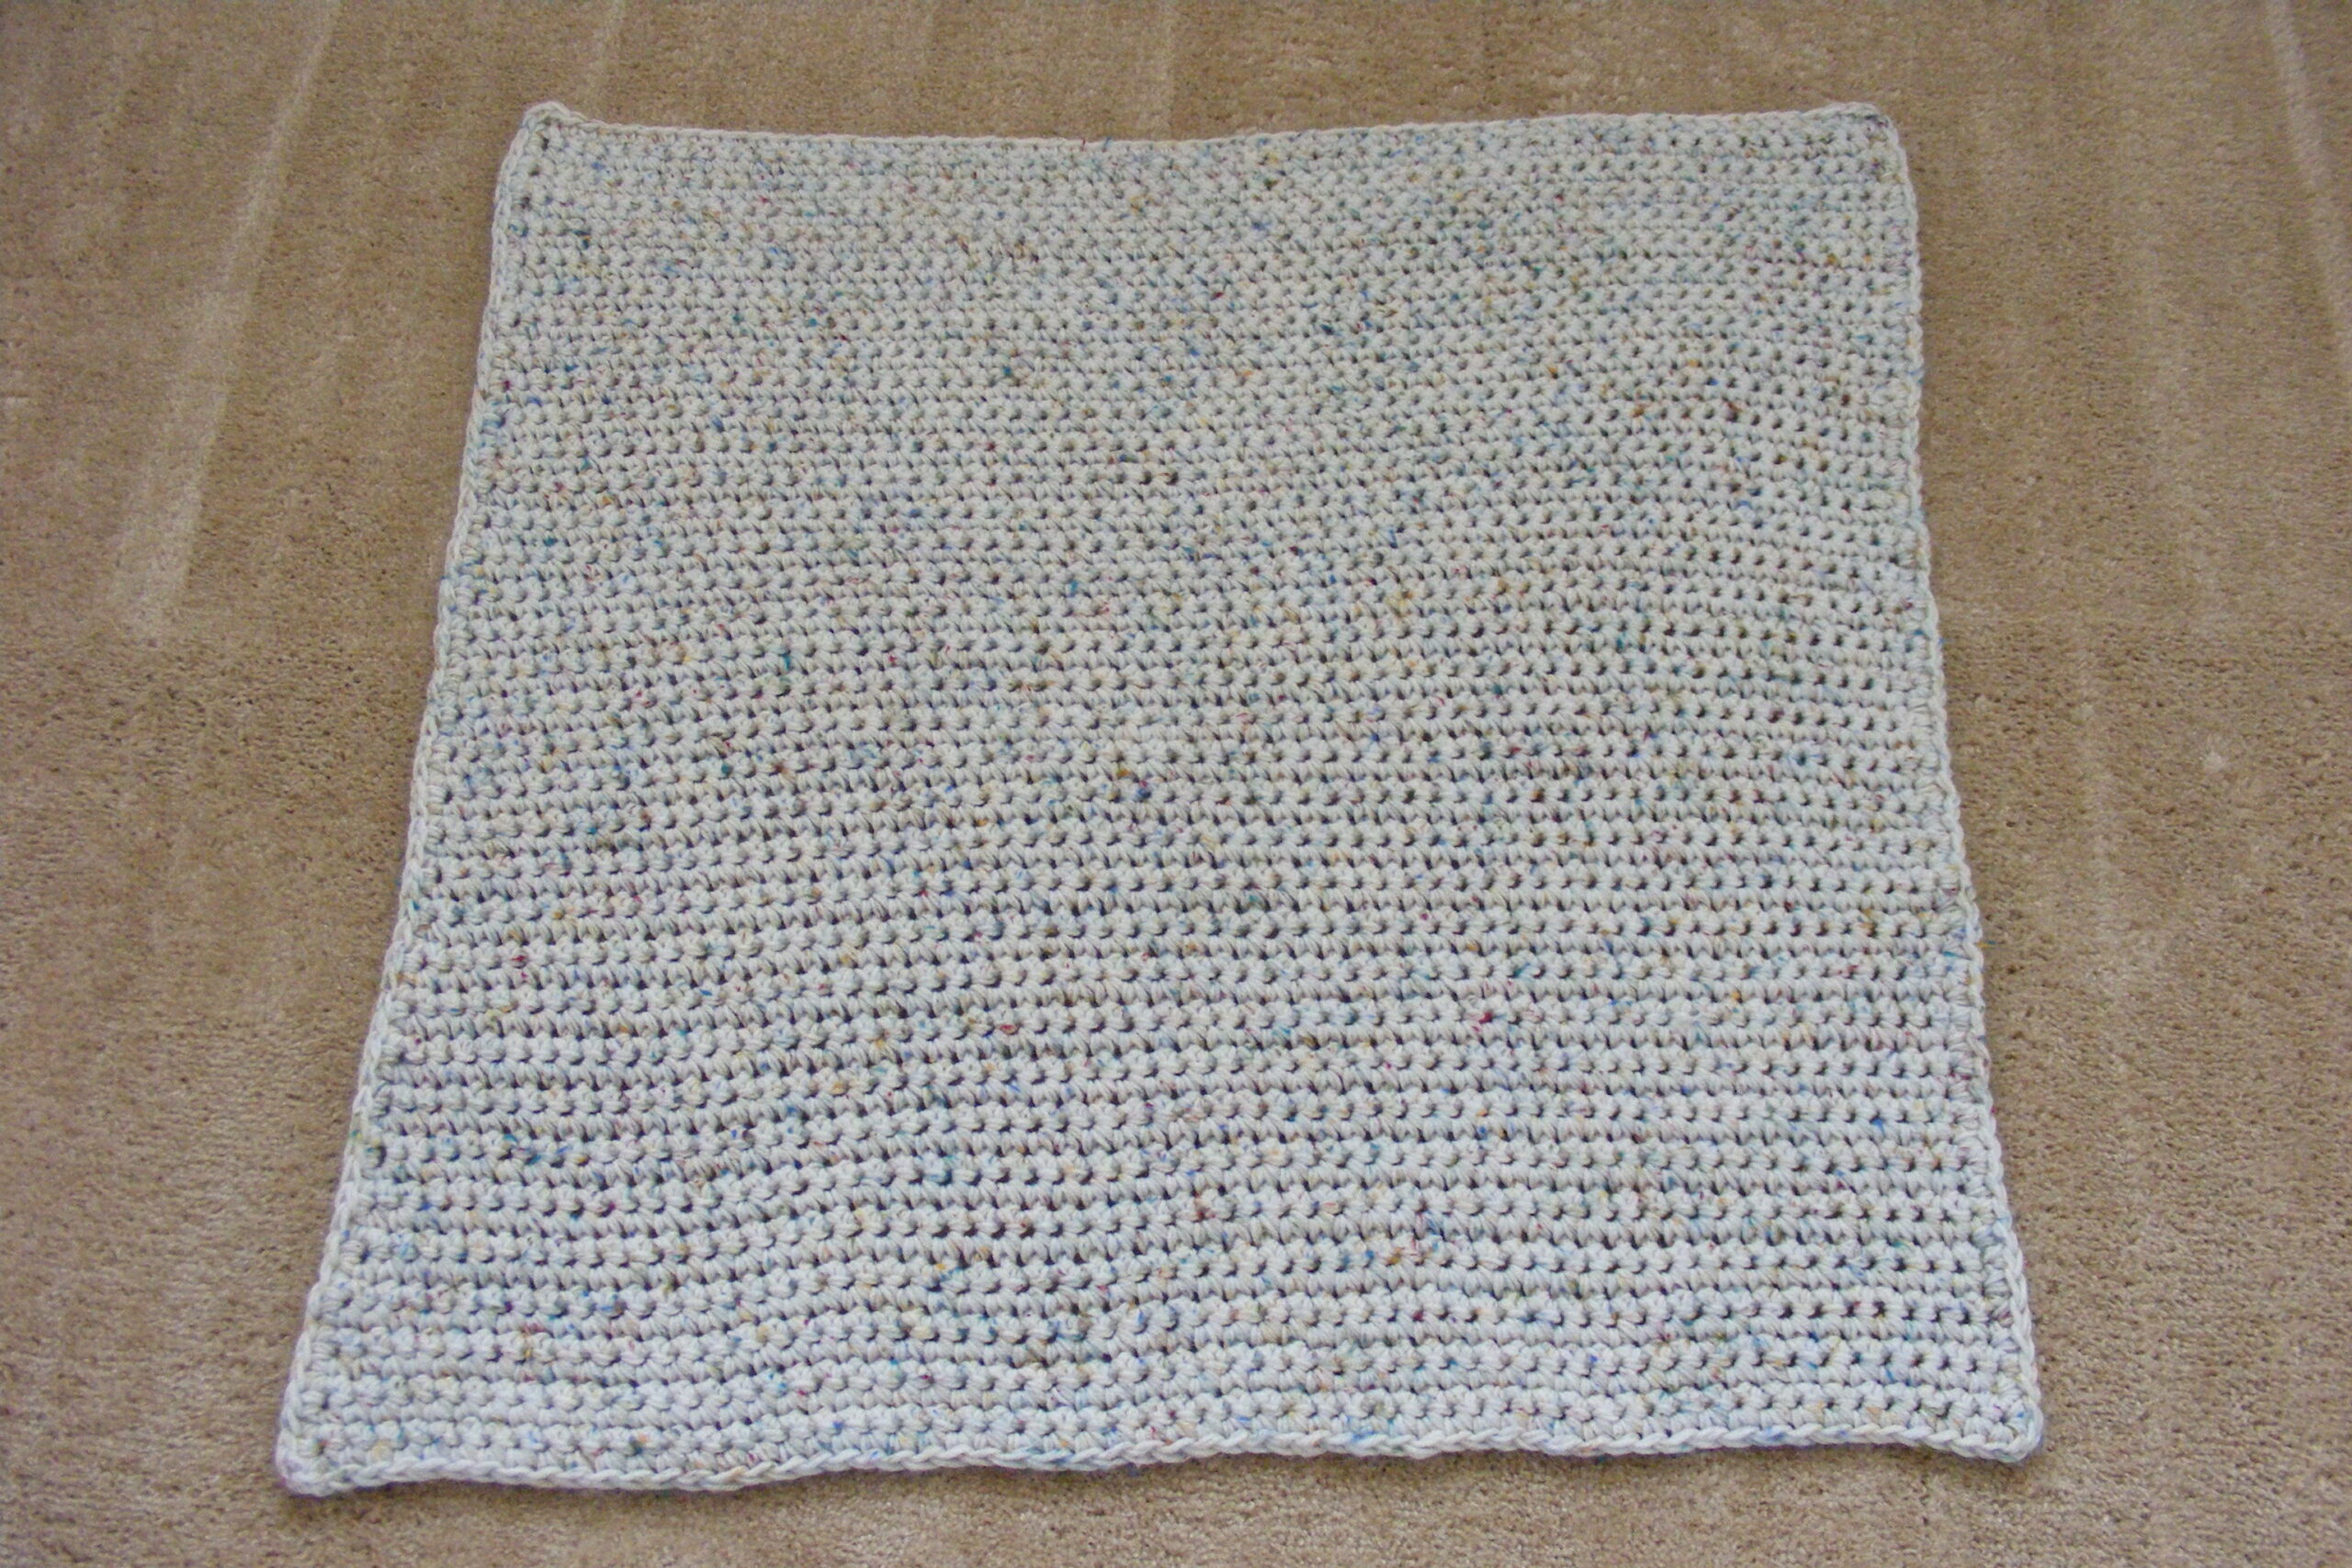 Single Crochet Baby Blanket laid on a carpeted floor